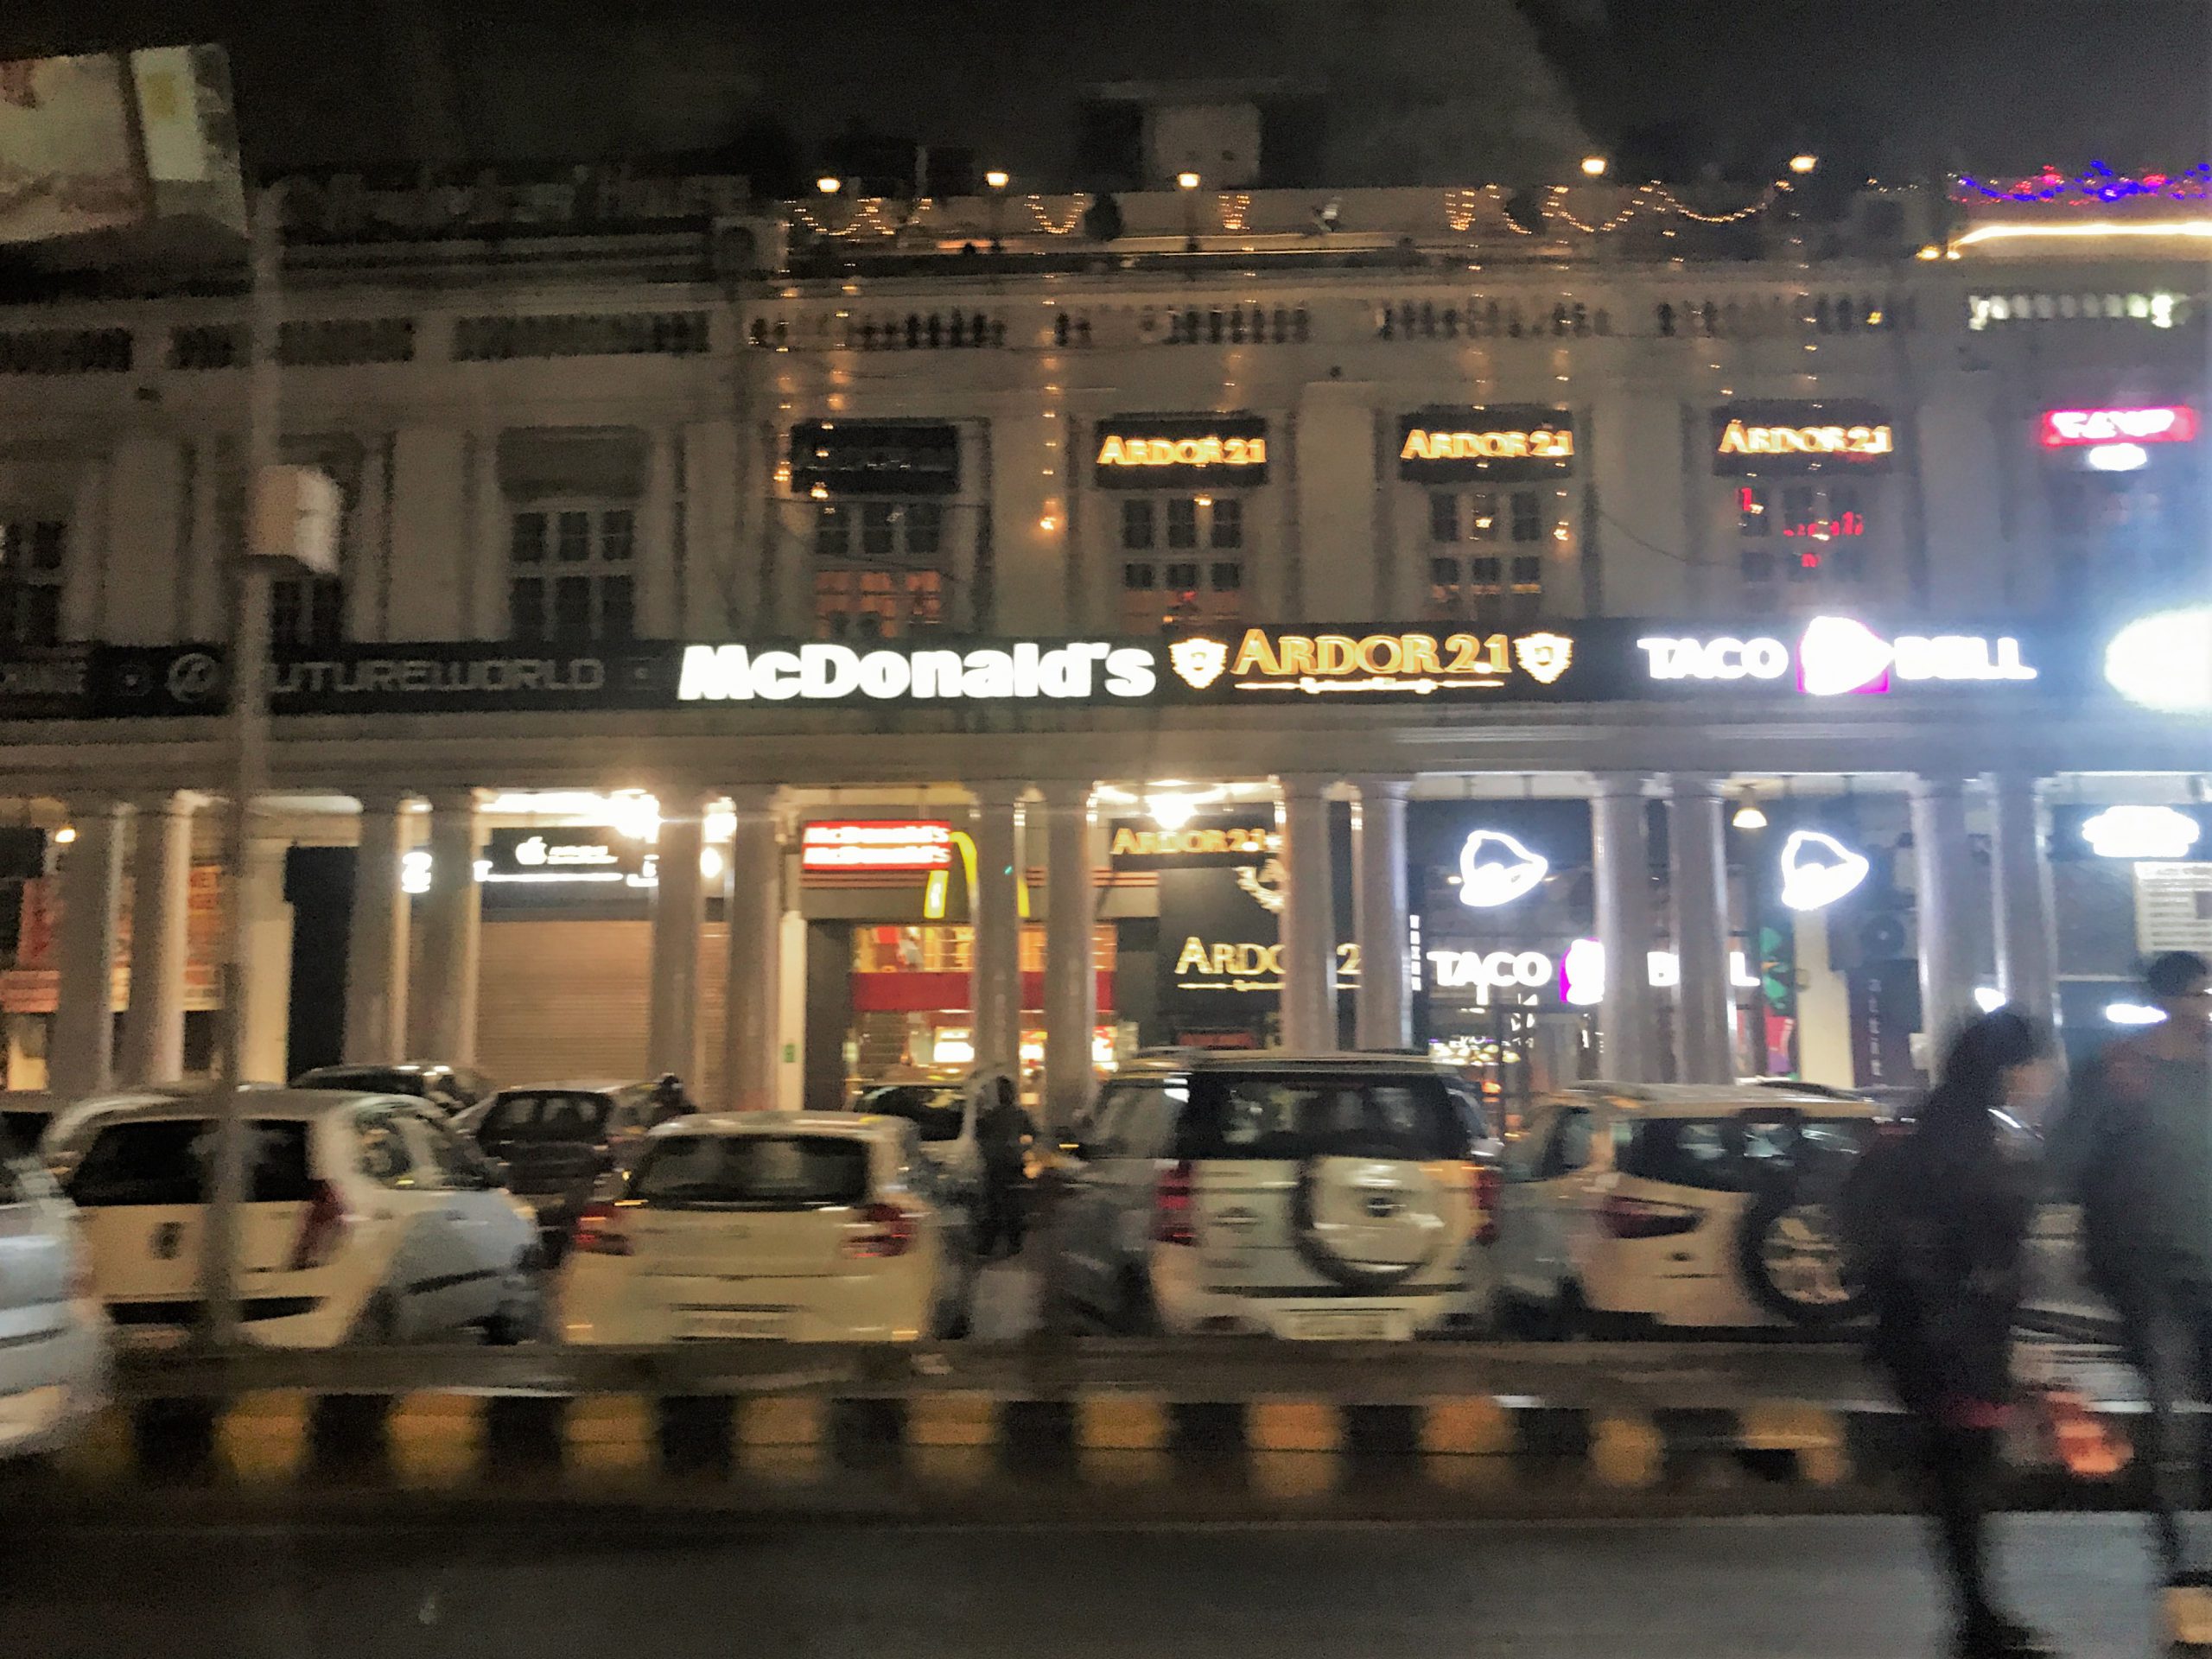 Connaught Place in Delhi, India as a contrast to Paharganj